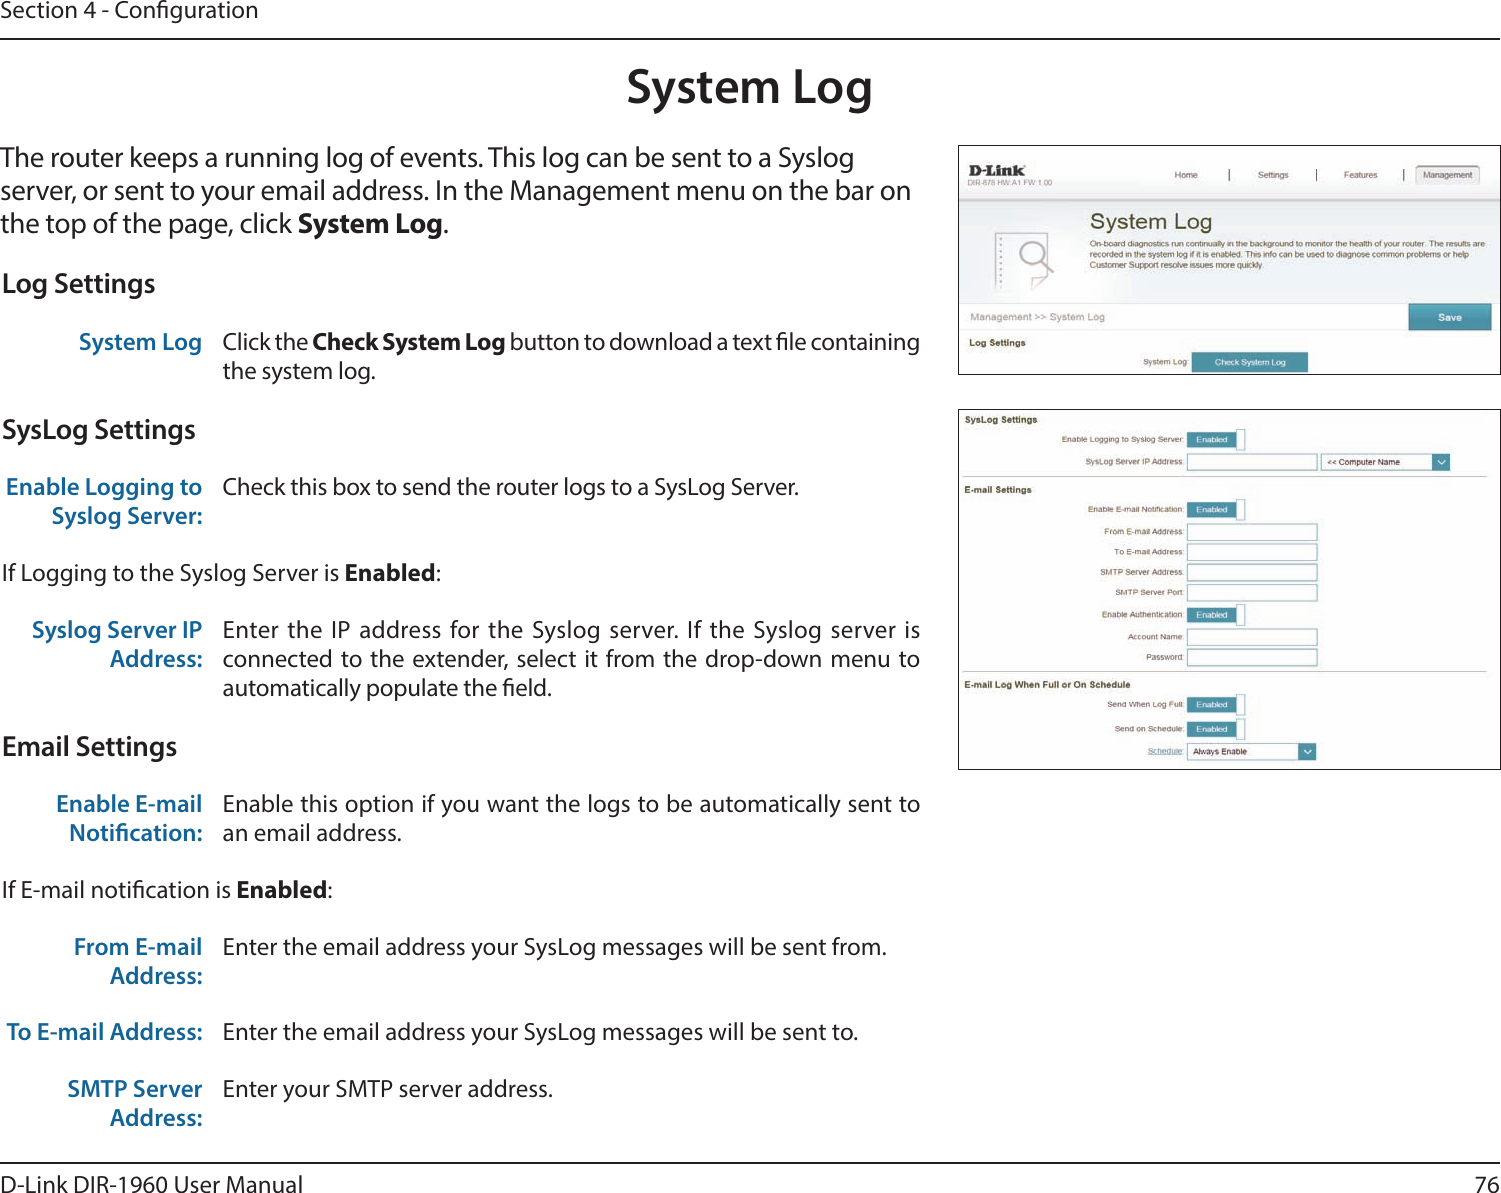 76D-Link DIR-1960 User ManualSection 4 - CongurationSystem LogThe router keeps a running log of events. This log can be sent to a Syslog server, or sent to your email address. In the Management menu on the bar on the top of the page, click System Log. Log SettingsSystem Log Click the Check System Log button to download a text le containing the system log.SysLog SettingsEnable Logging to Syslog Server:Check this box to send the router logs to a SysLog Server. If Logging to the Syslog Server is Enabled:Syslog Server IP Address:Enter the IP address for the Syslog server. If the Syslog server is connected to the extender, select it from the drop-down menu to automatically populate the eld. Email SettingsEnable E-mail Notication:Enable this option if you want the logs to be automatically sent to an email address.If E-mail notication is Enabled:From E-mail Address:Enter the email address your SysLog messages will be sent from.To E-mail Address: Enter the email address your SysLog messages will be sent to.SMTP Server Address:Enter your SMTP server address.